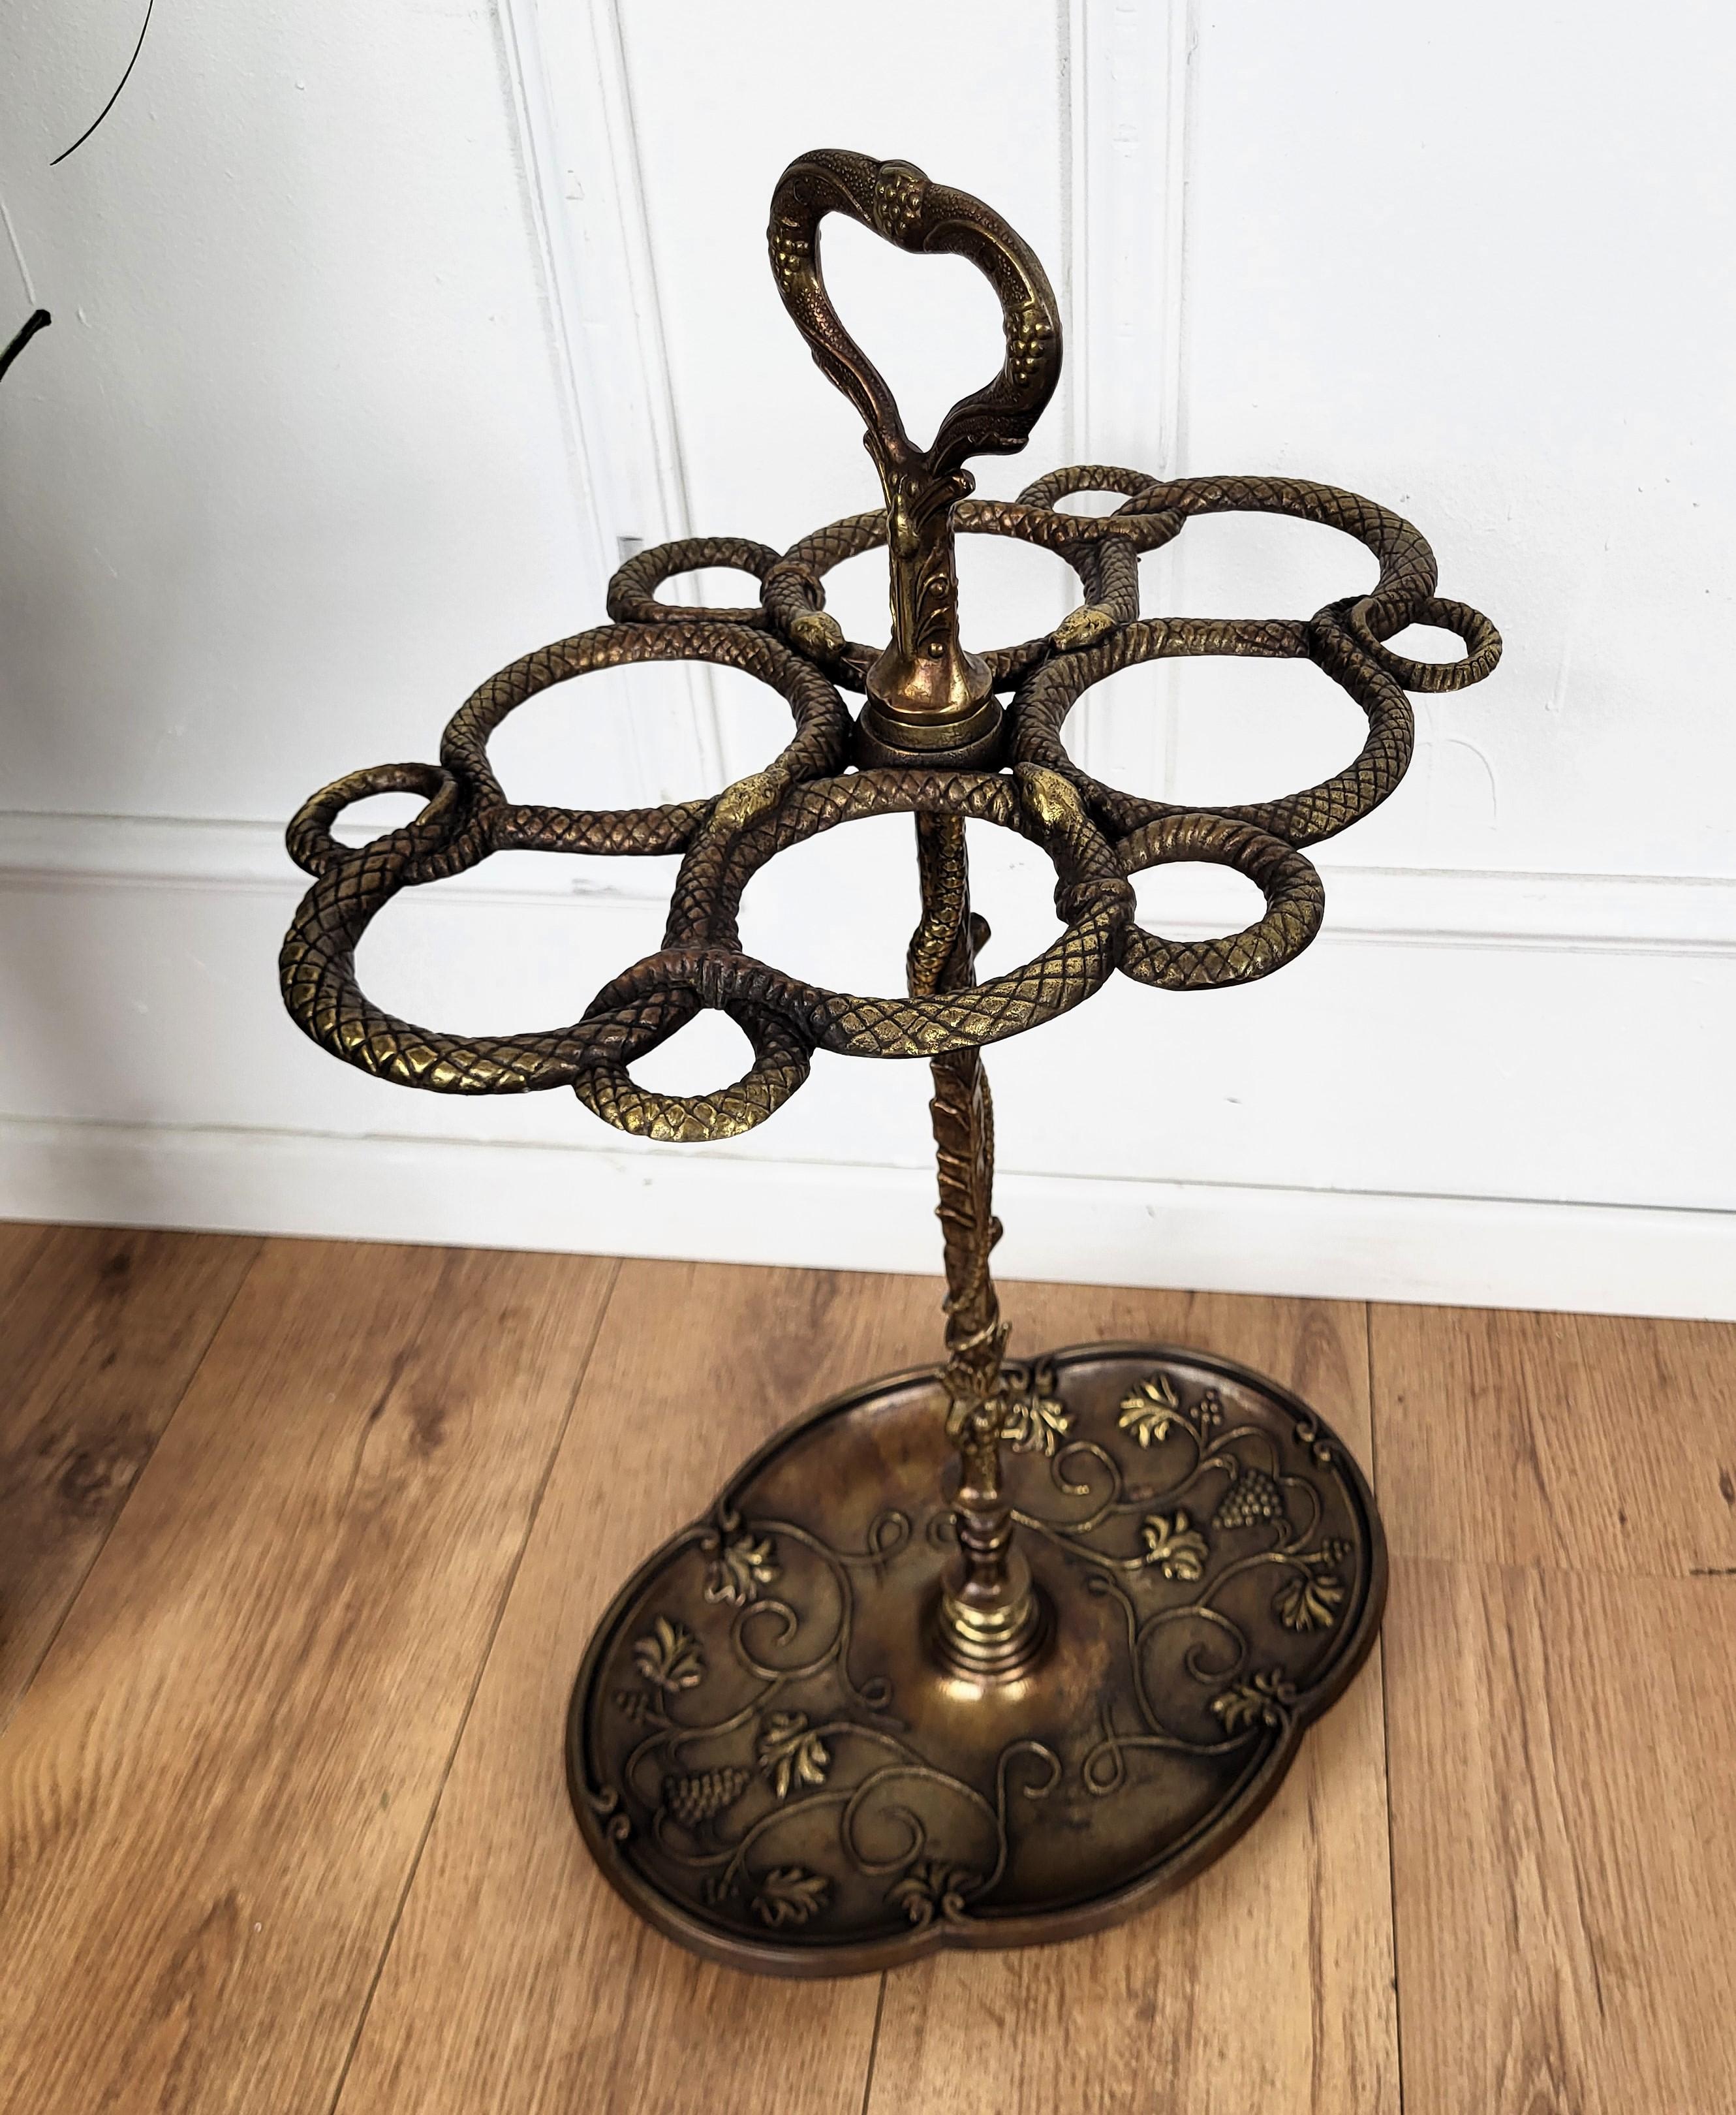 Beautiful and elegant golden cast iron umbrella stand. The top is decorated with four snakes and their heads, the central andles and stand are as well decorated and show two faces and several other fidures as does the bottom umbrella holder. Great